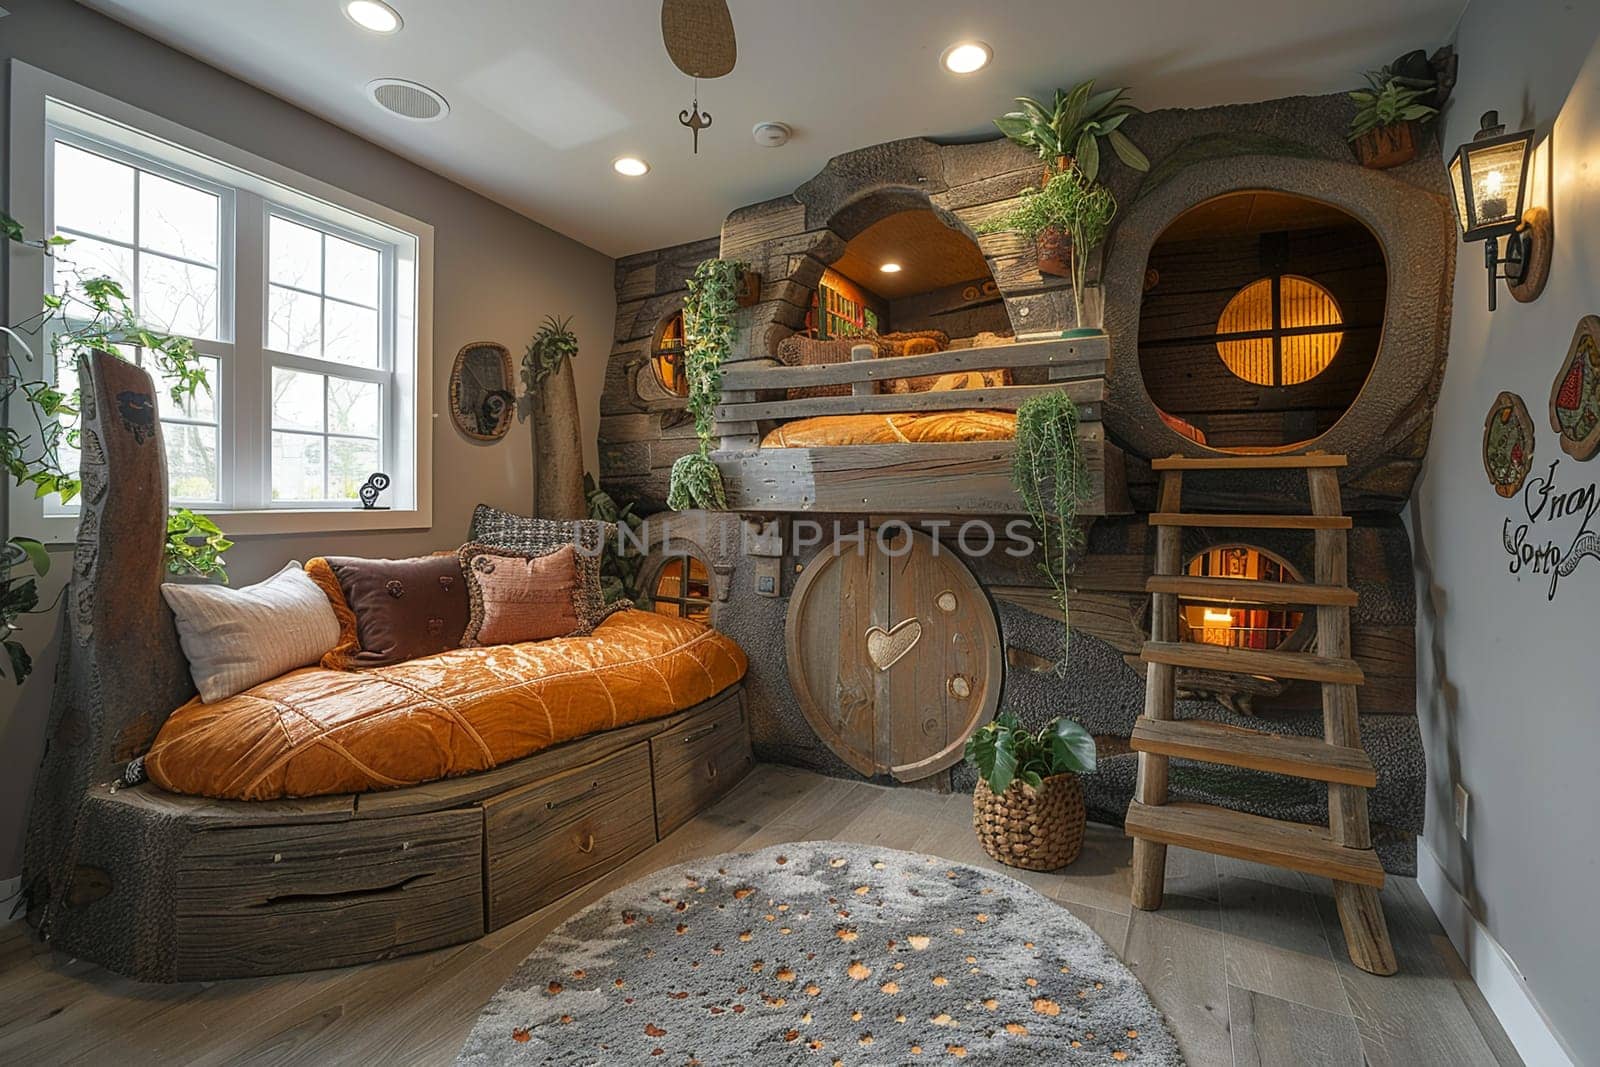 Adventure-themed kid's bedroom with a loft bed and imaginative play areas